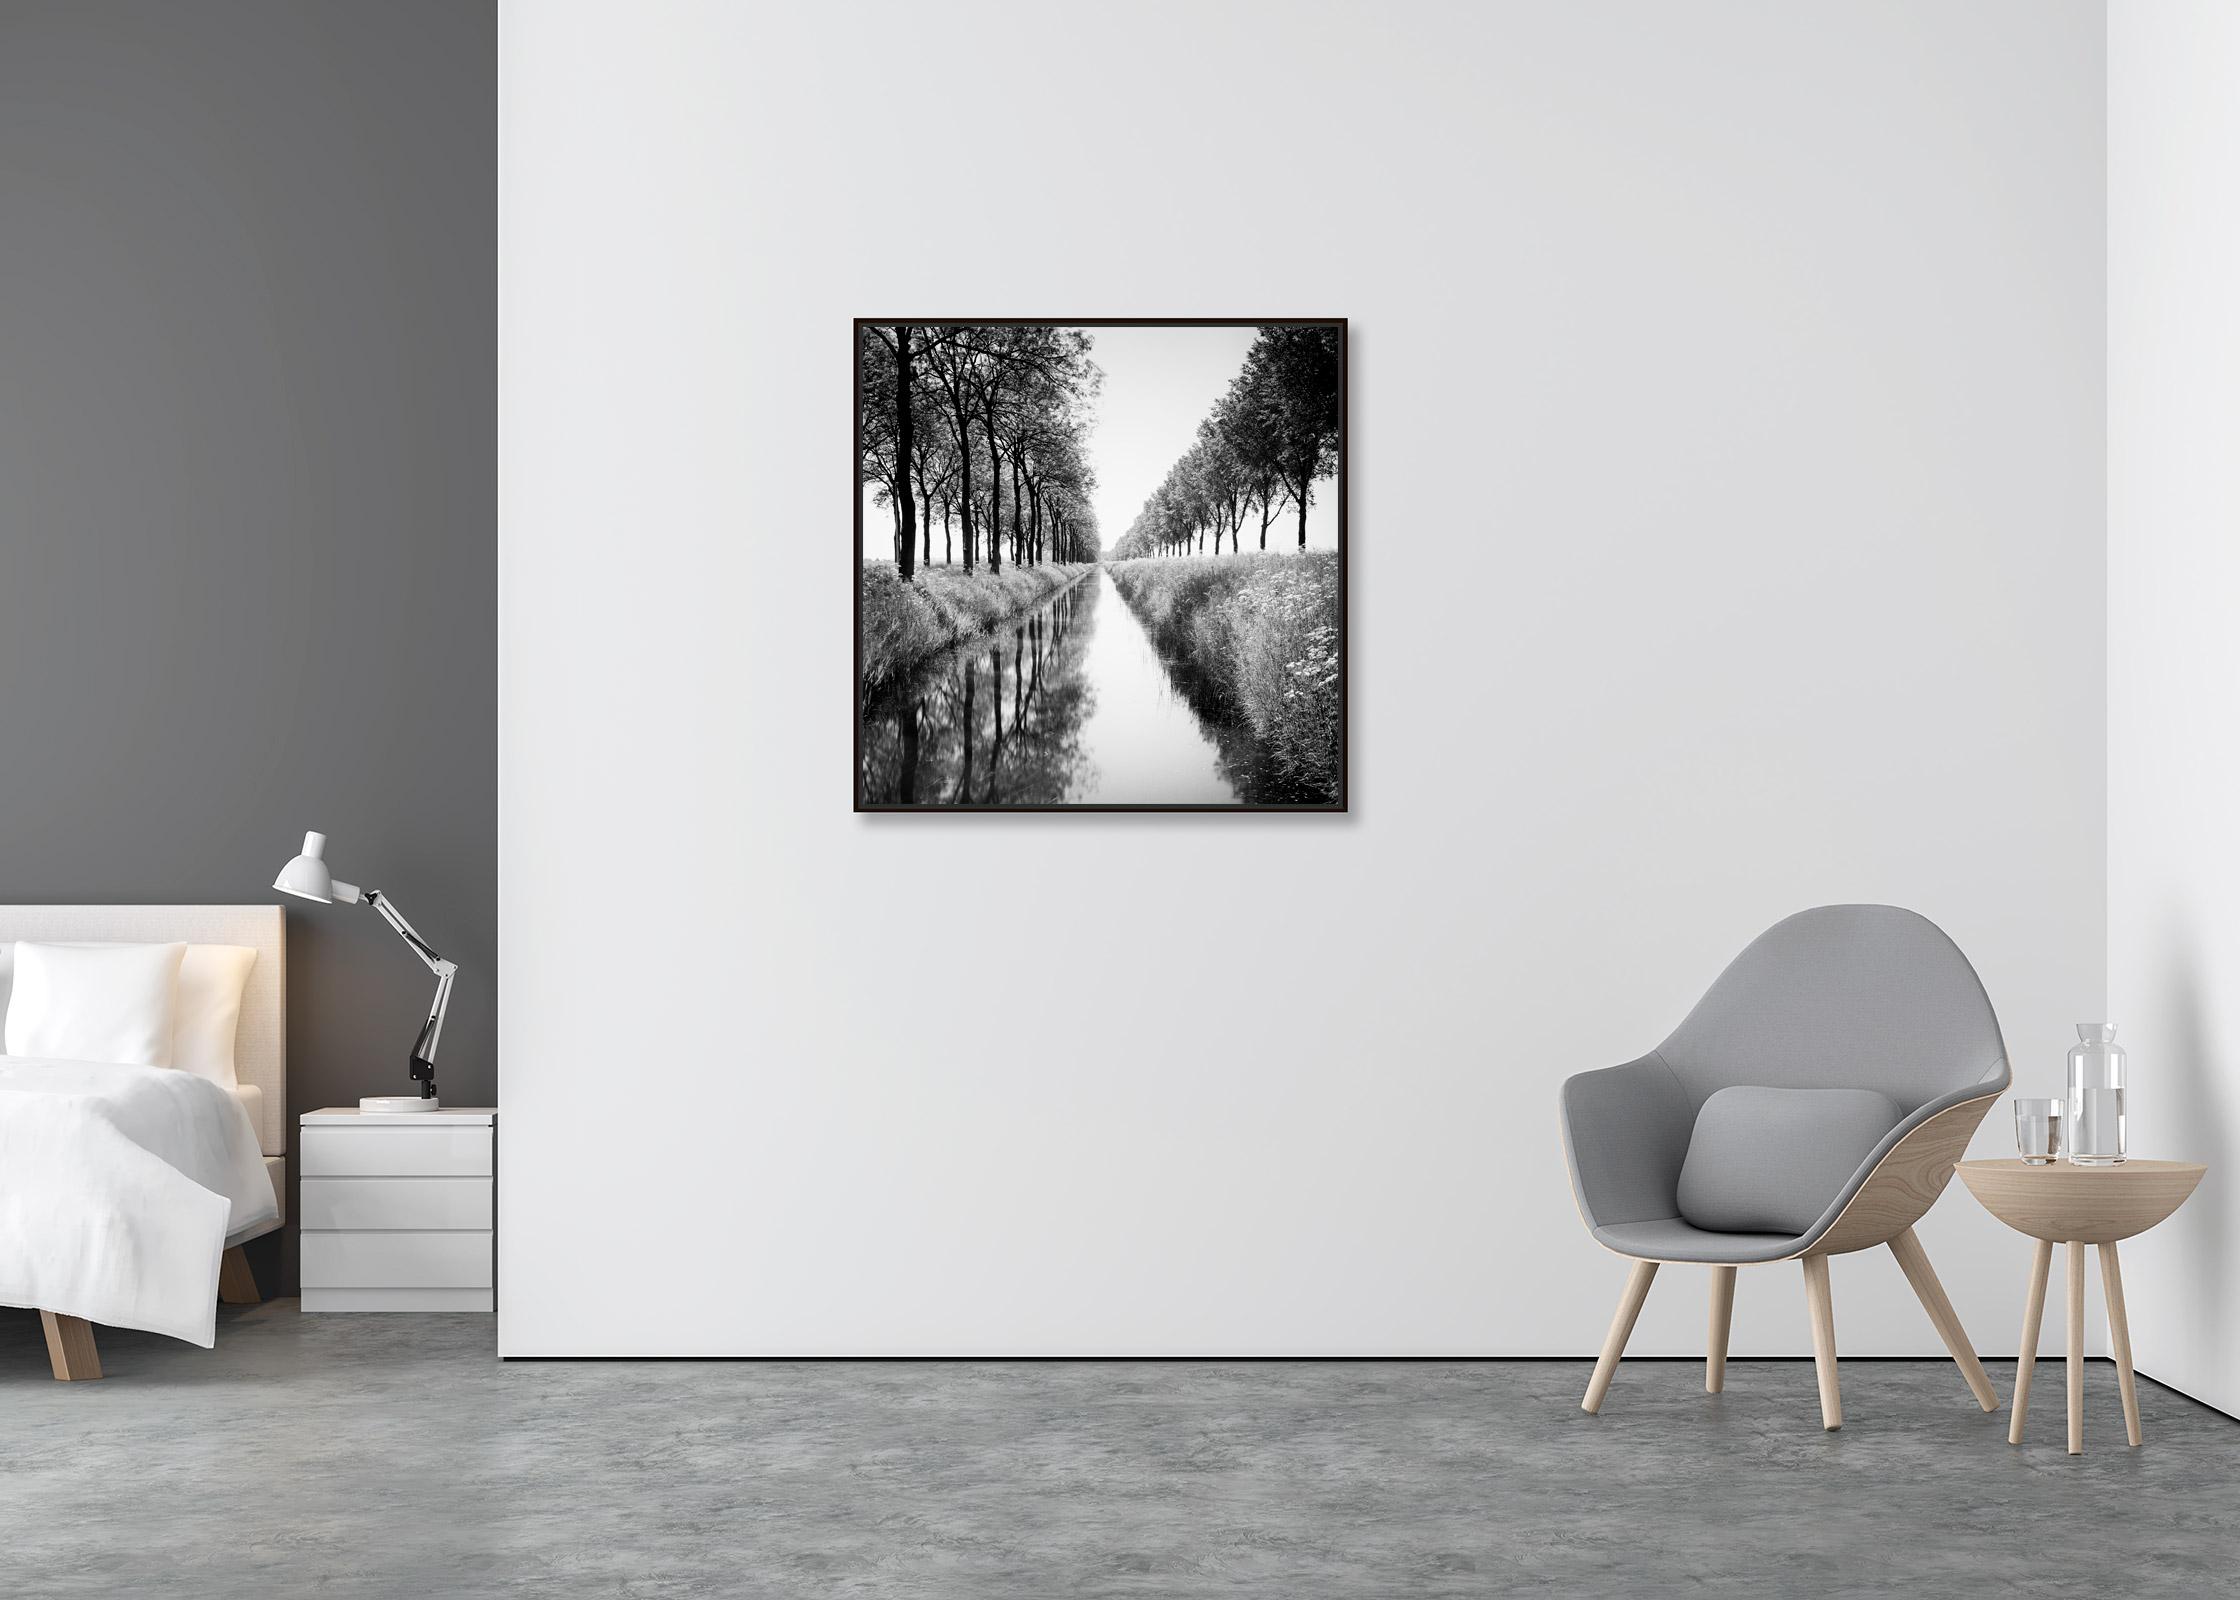 Gracht, tree avenue, water reflection, black and white long exposure photography - Contemporary Photograph by Gerald Berghammer